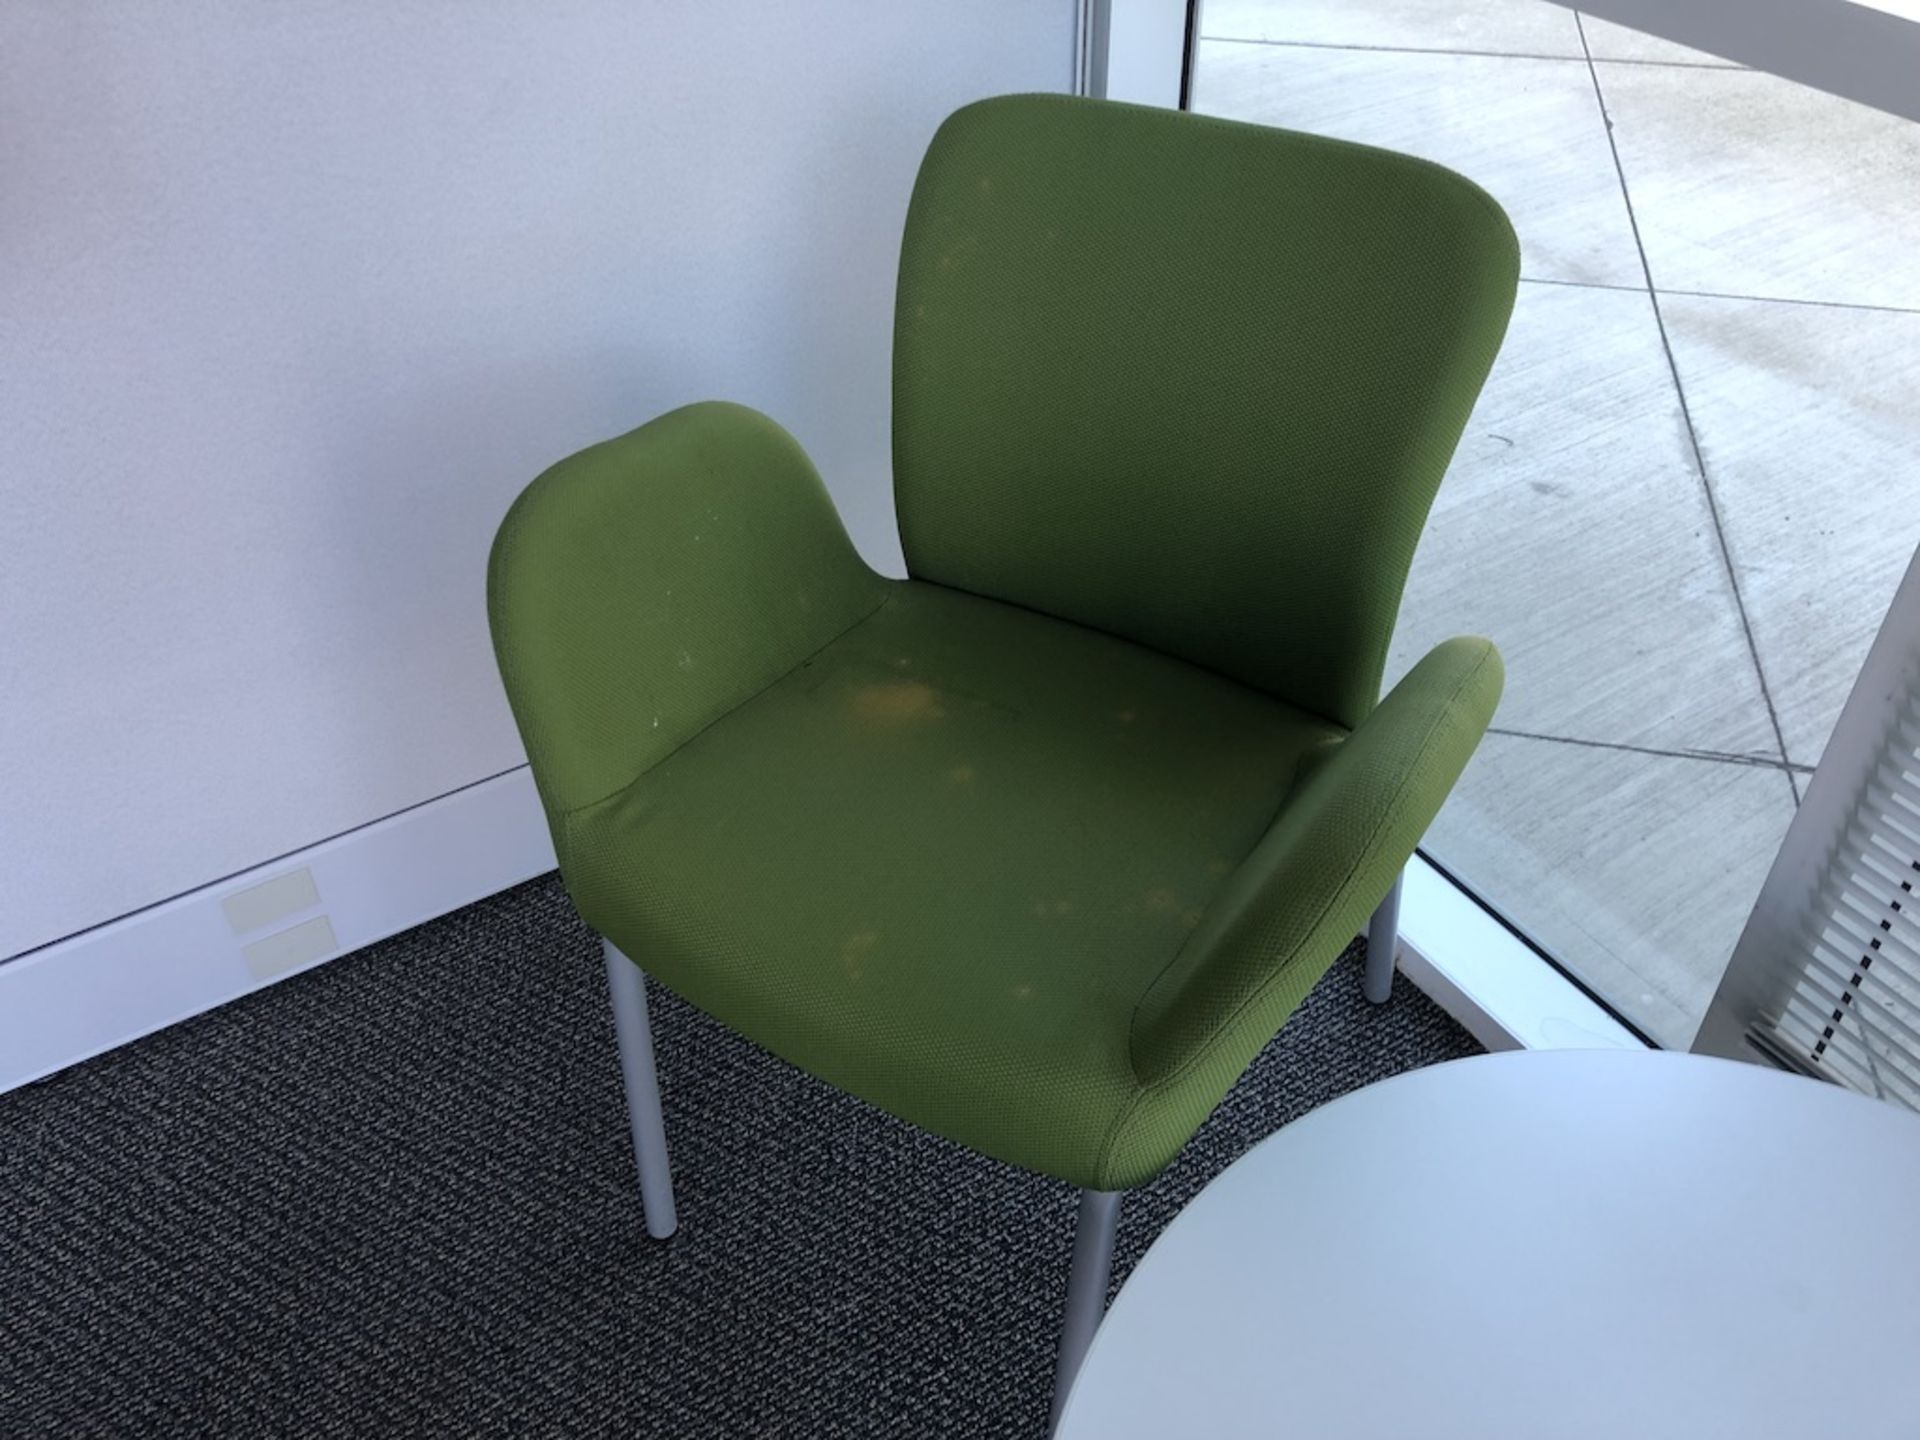 GREEN CUSHION PADDED CHAIR   SCHNEIDER ELECTRIC- 6611 PRESTON AVE SUITE A - Image 3 of 3